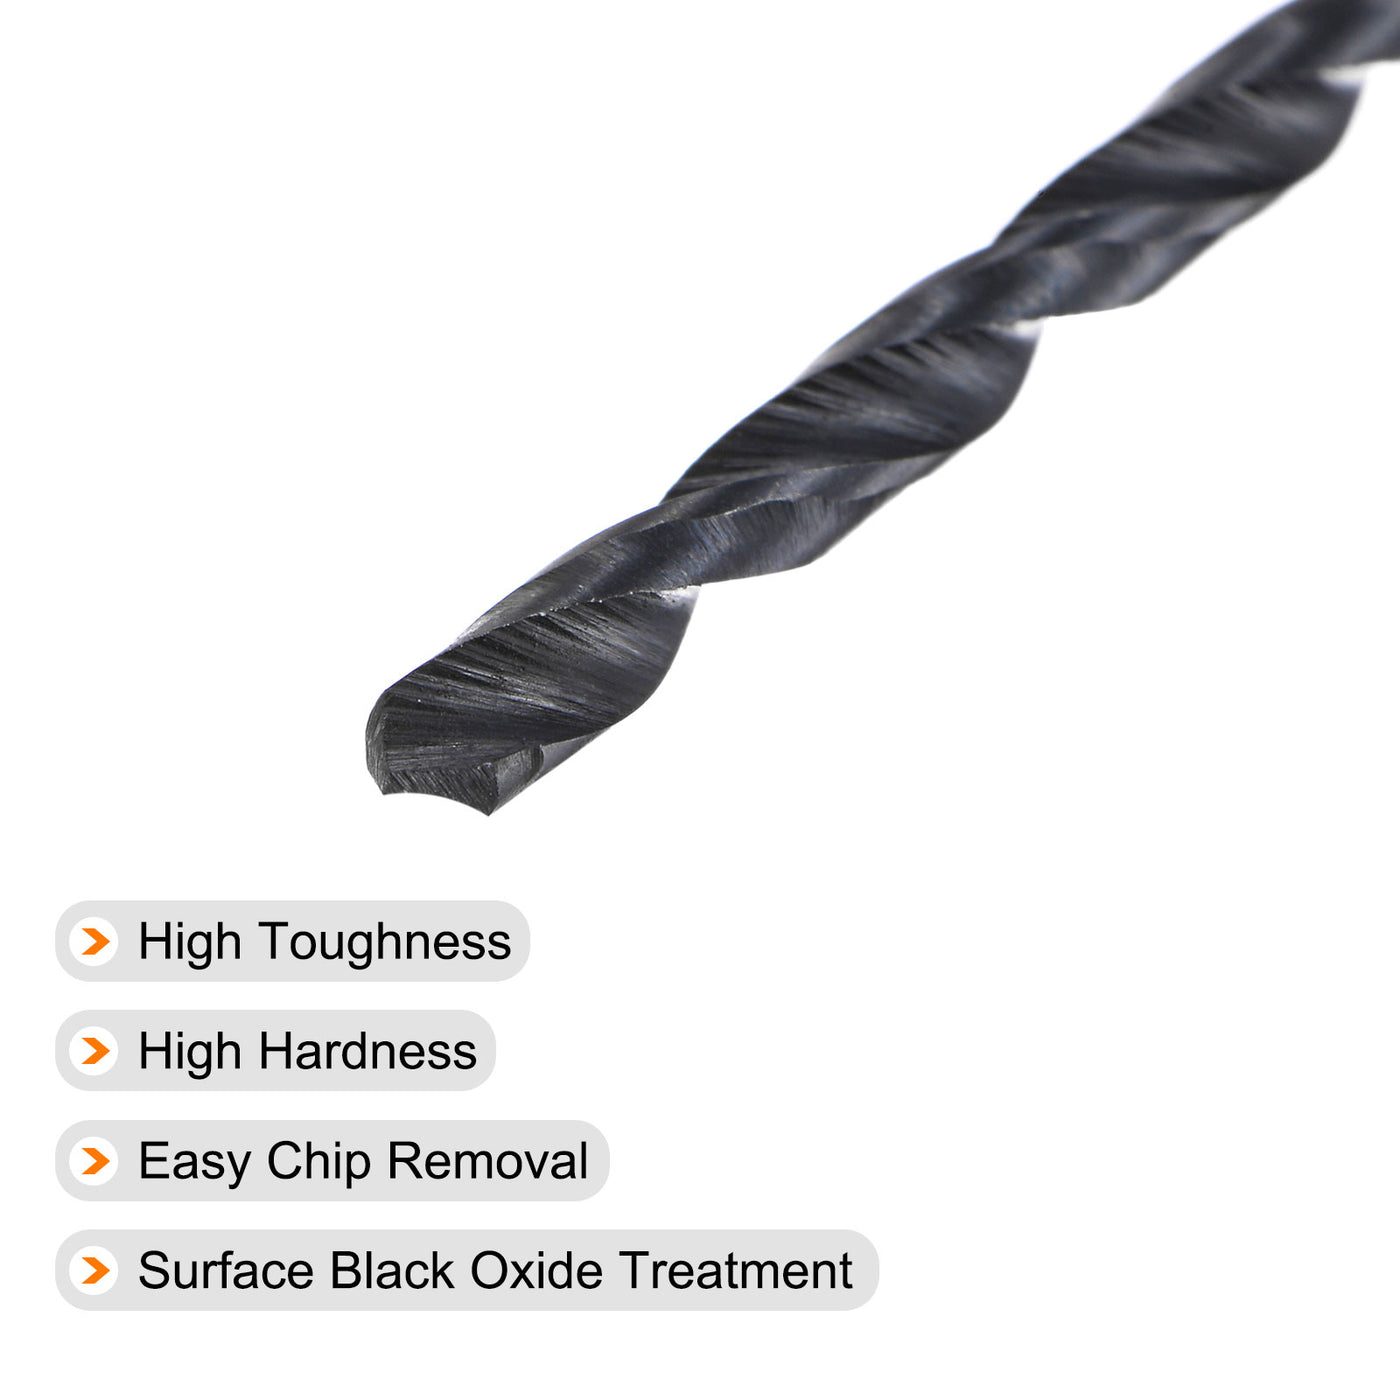 uxcell Uxcell High Speed Steel Twist Drill Bit, 2.8mm Fully Ground Black Oxide 59mm Long 2Pcs